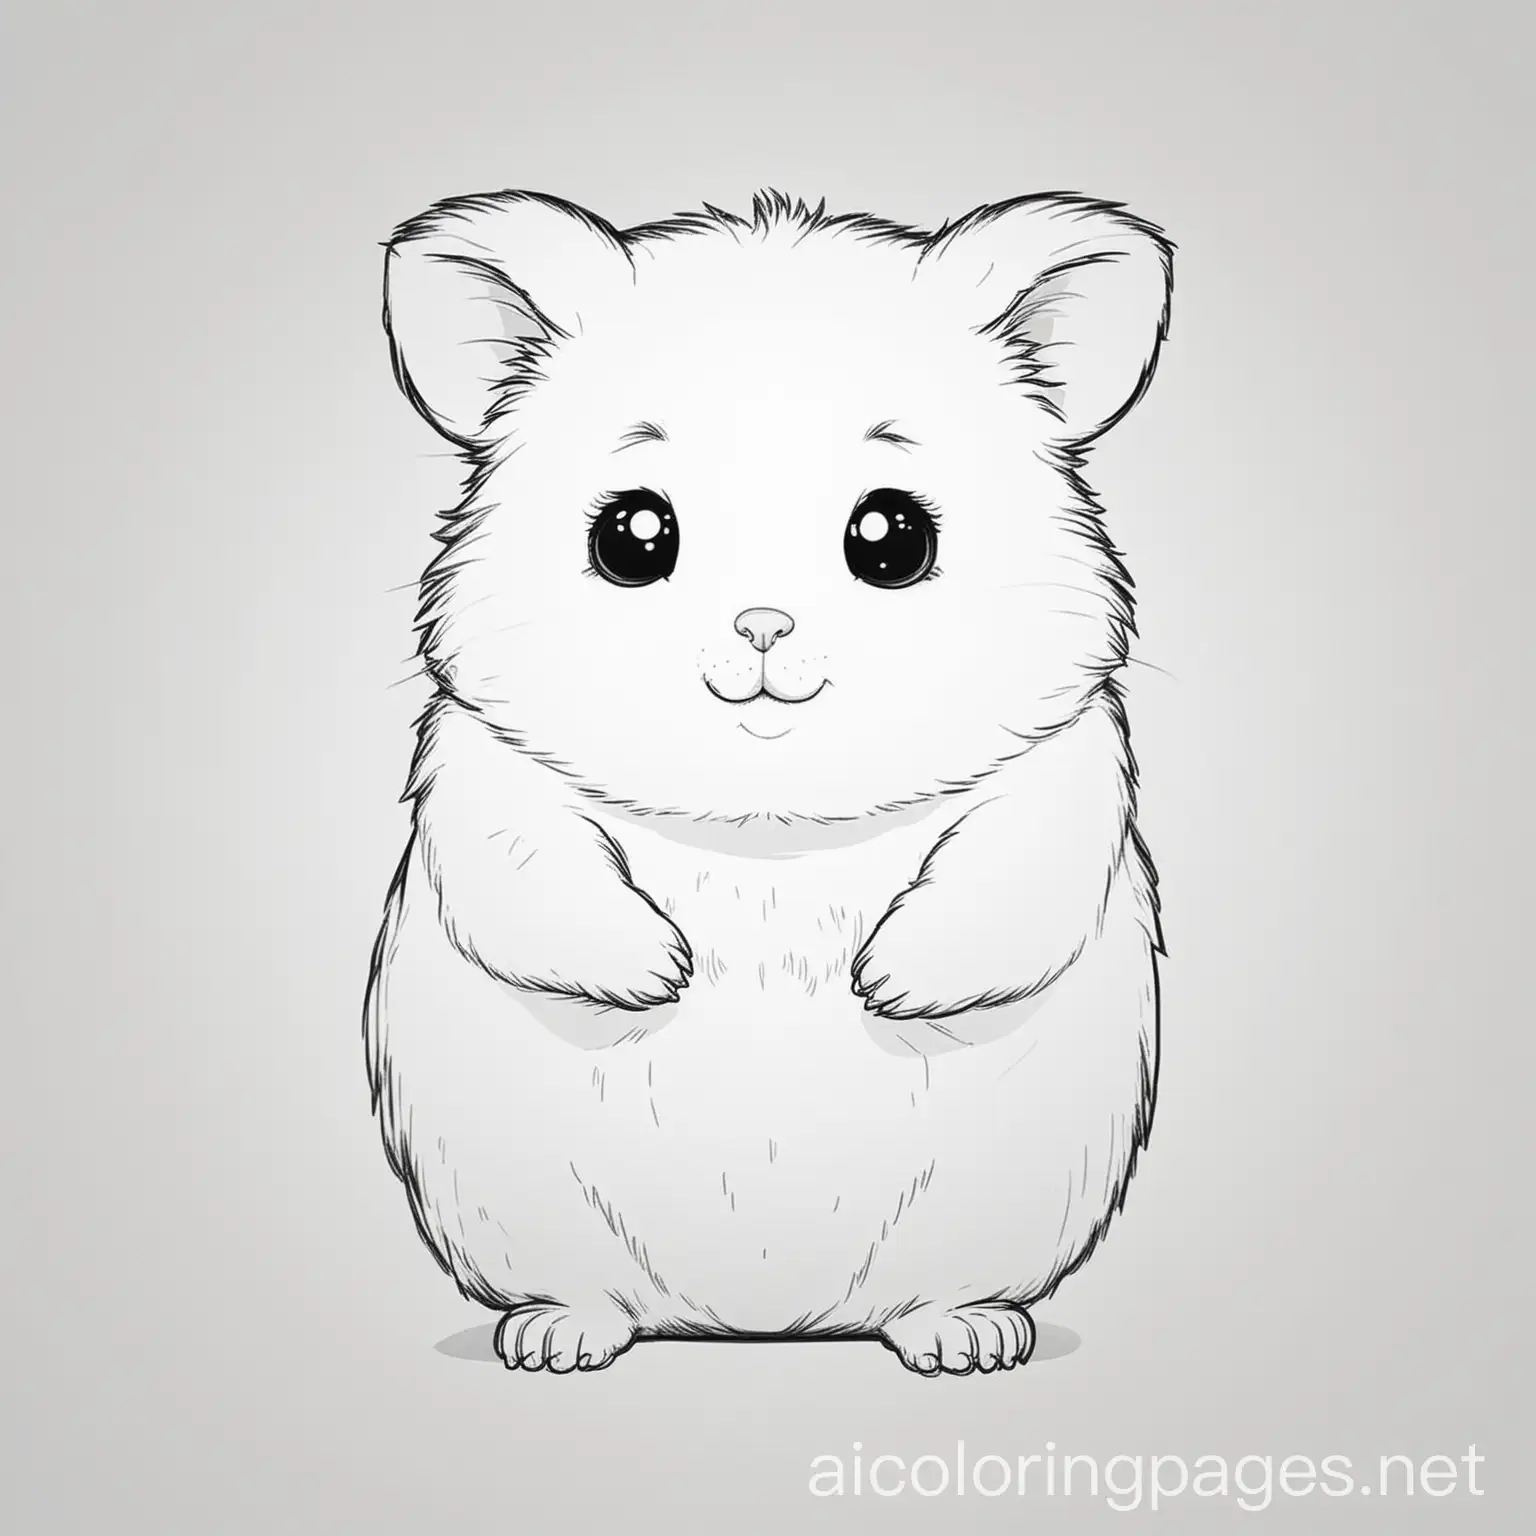 Adorable-Hamster-Coloring-Page-with-Simplicity-and-Ample-White-Space